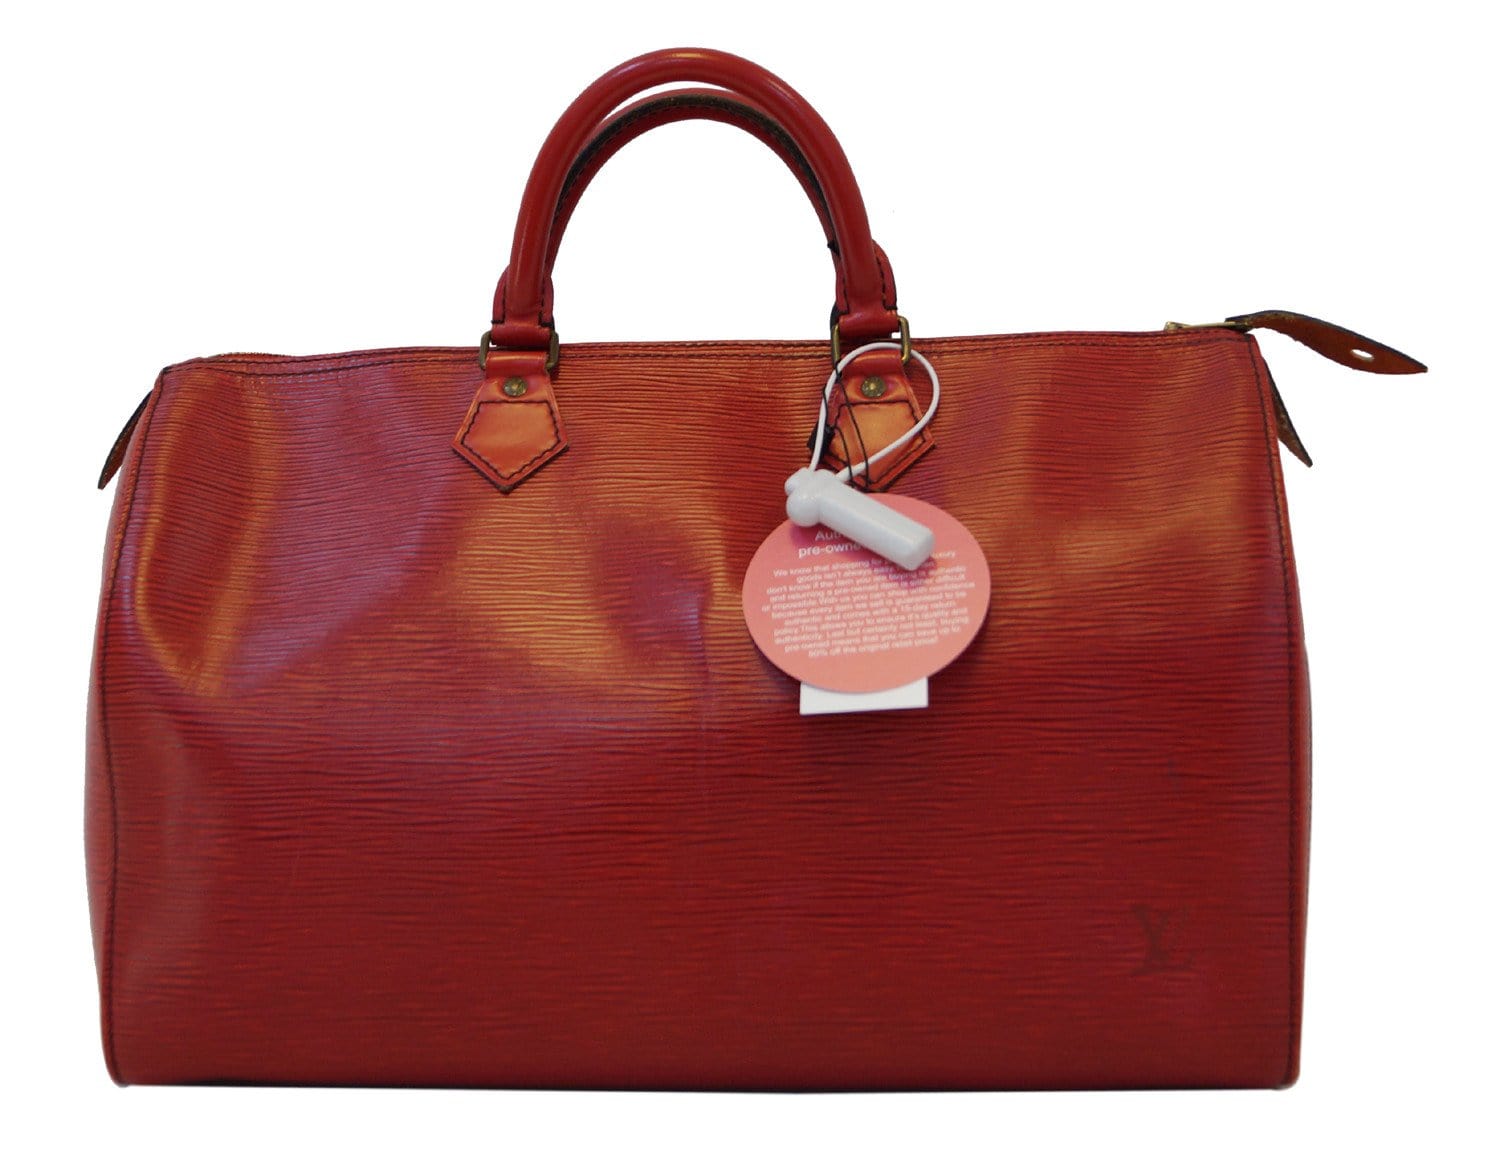 LOUIS VUITTON LV Speedy 35 Travel Hand Bag Epi Leather Red France